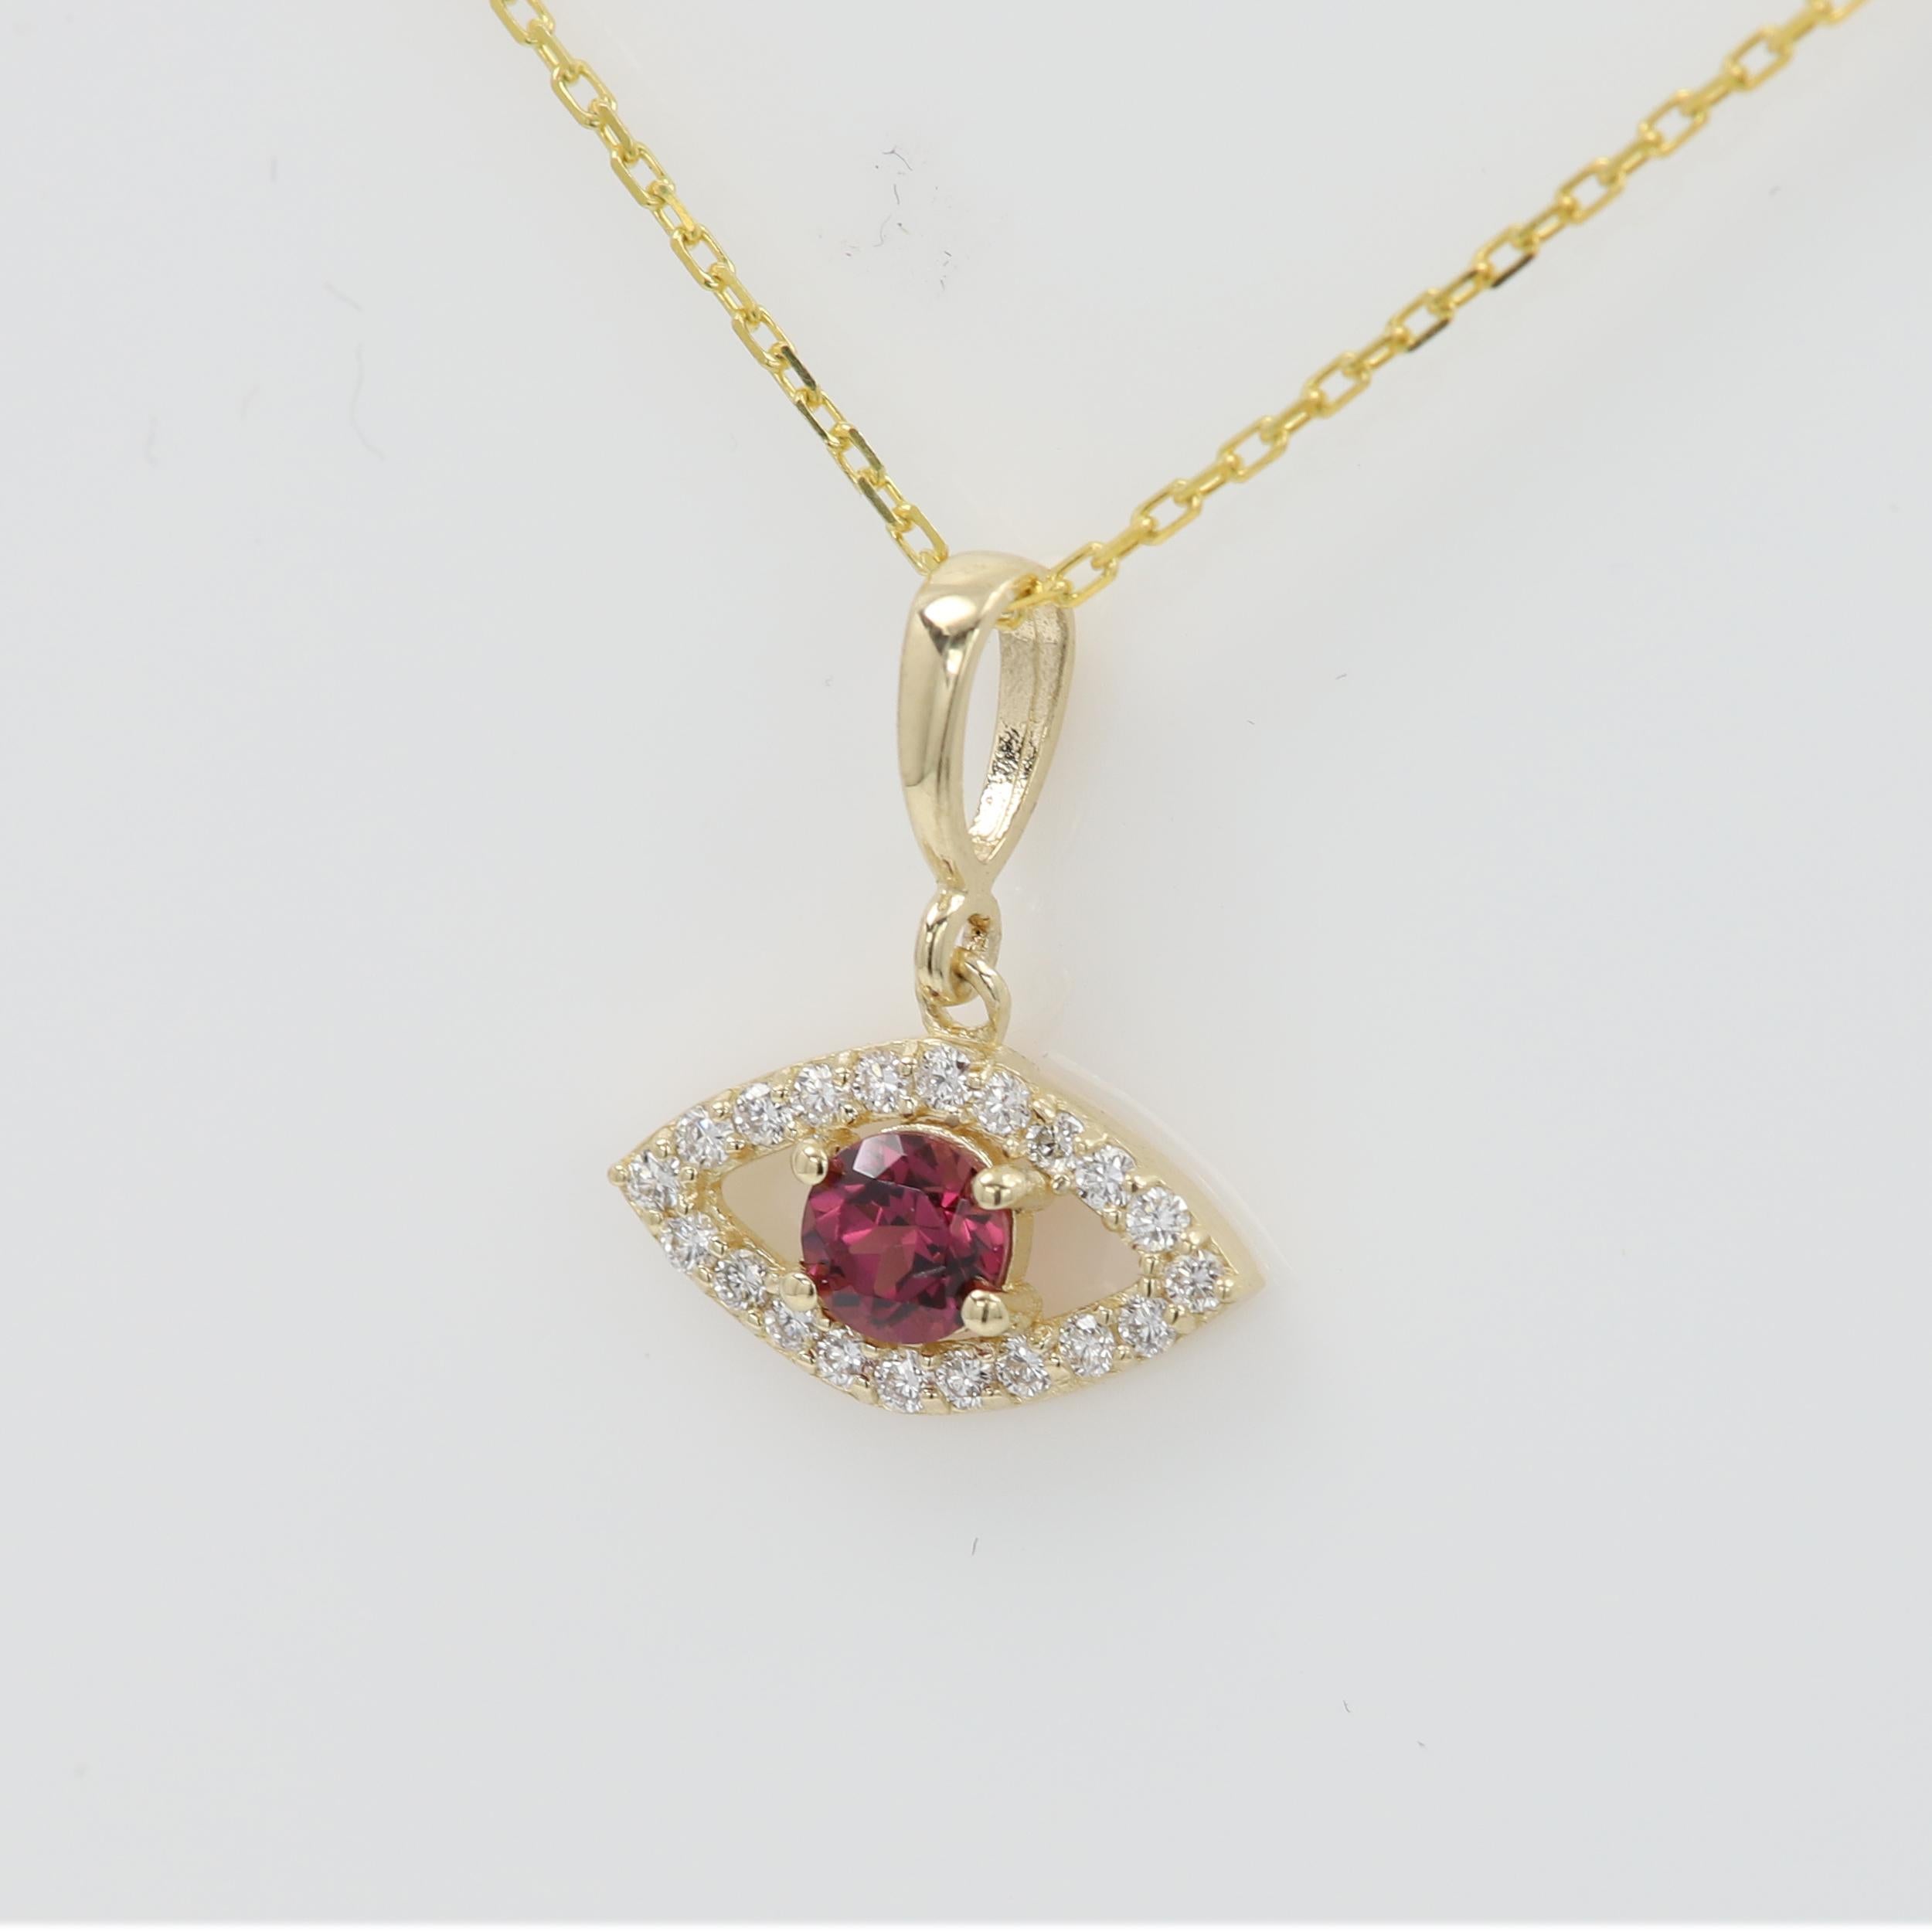 Brilliant Cute Mini Gold Evil Eye Pendant

Natural Diamonds and Rhodolite (a color similar to maroon)
14k Yellow Gold  0.50 grams (without the chain)
Made with very Shiny quality diamonds G-F-VS approx 0.14 carat.

the small size makes it very cute